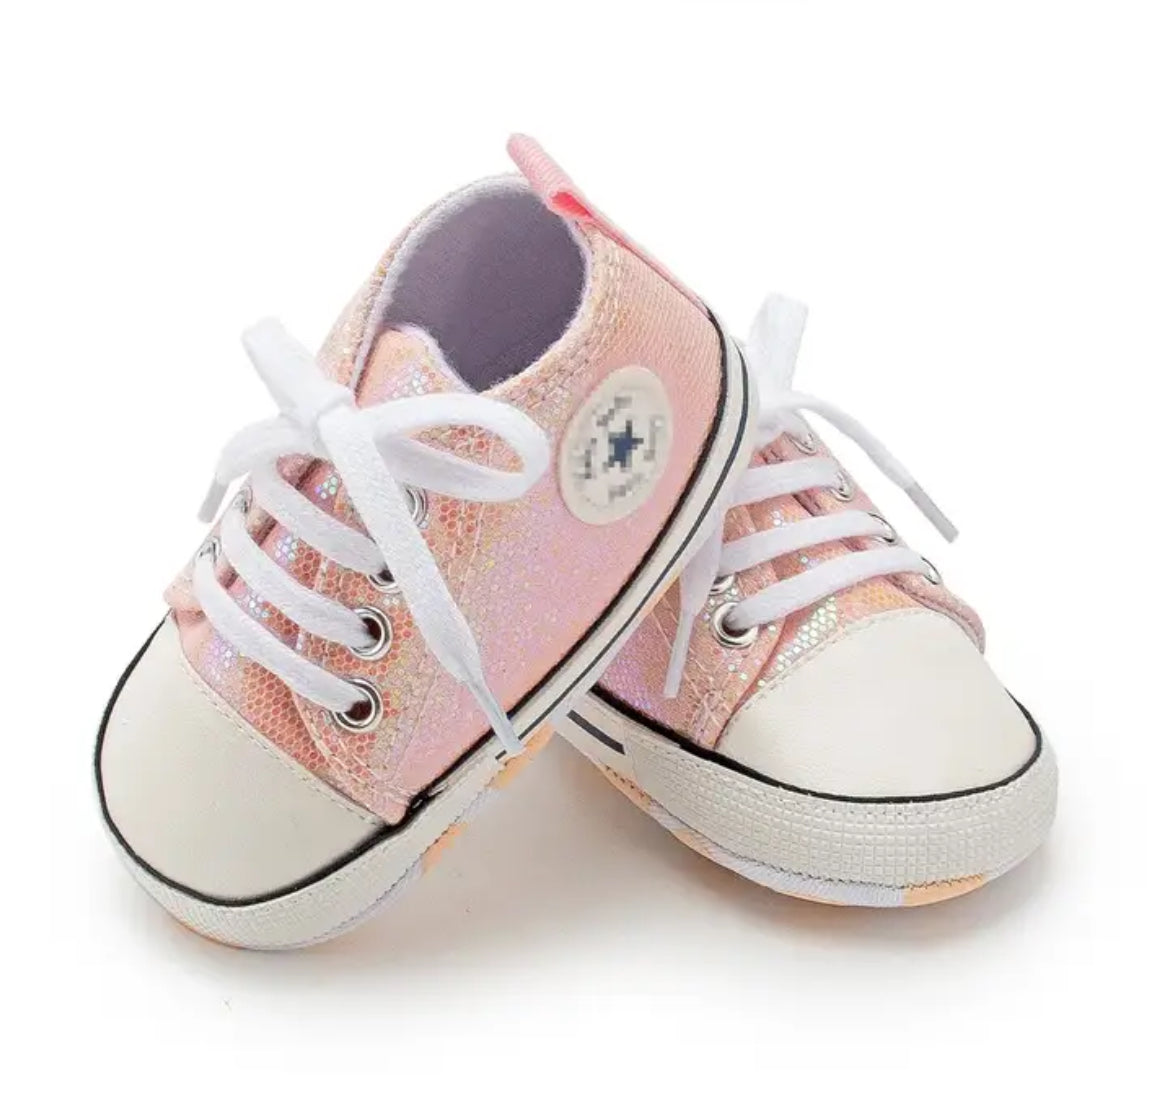 Glam ✨ Babies Collection, Fashion Shining Canvas Sneakers